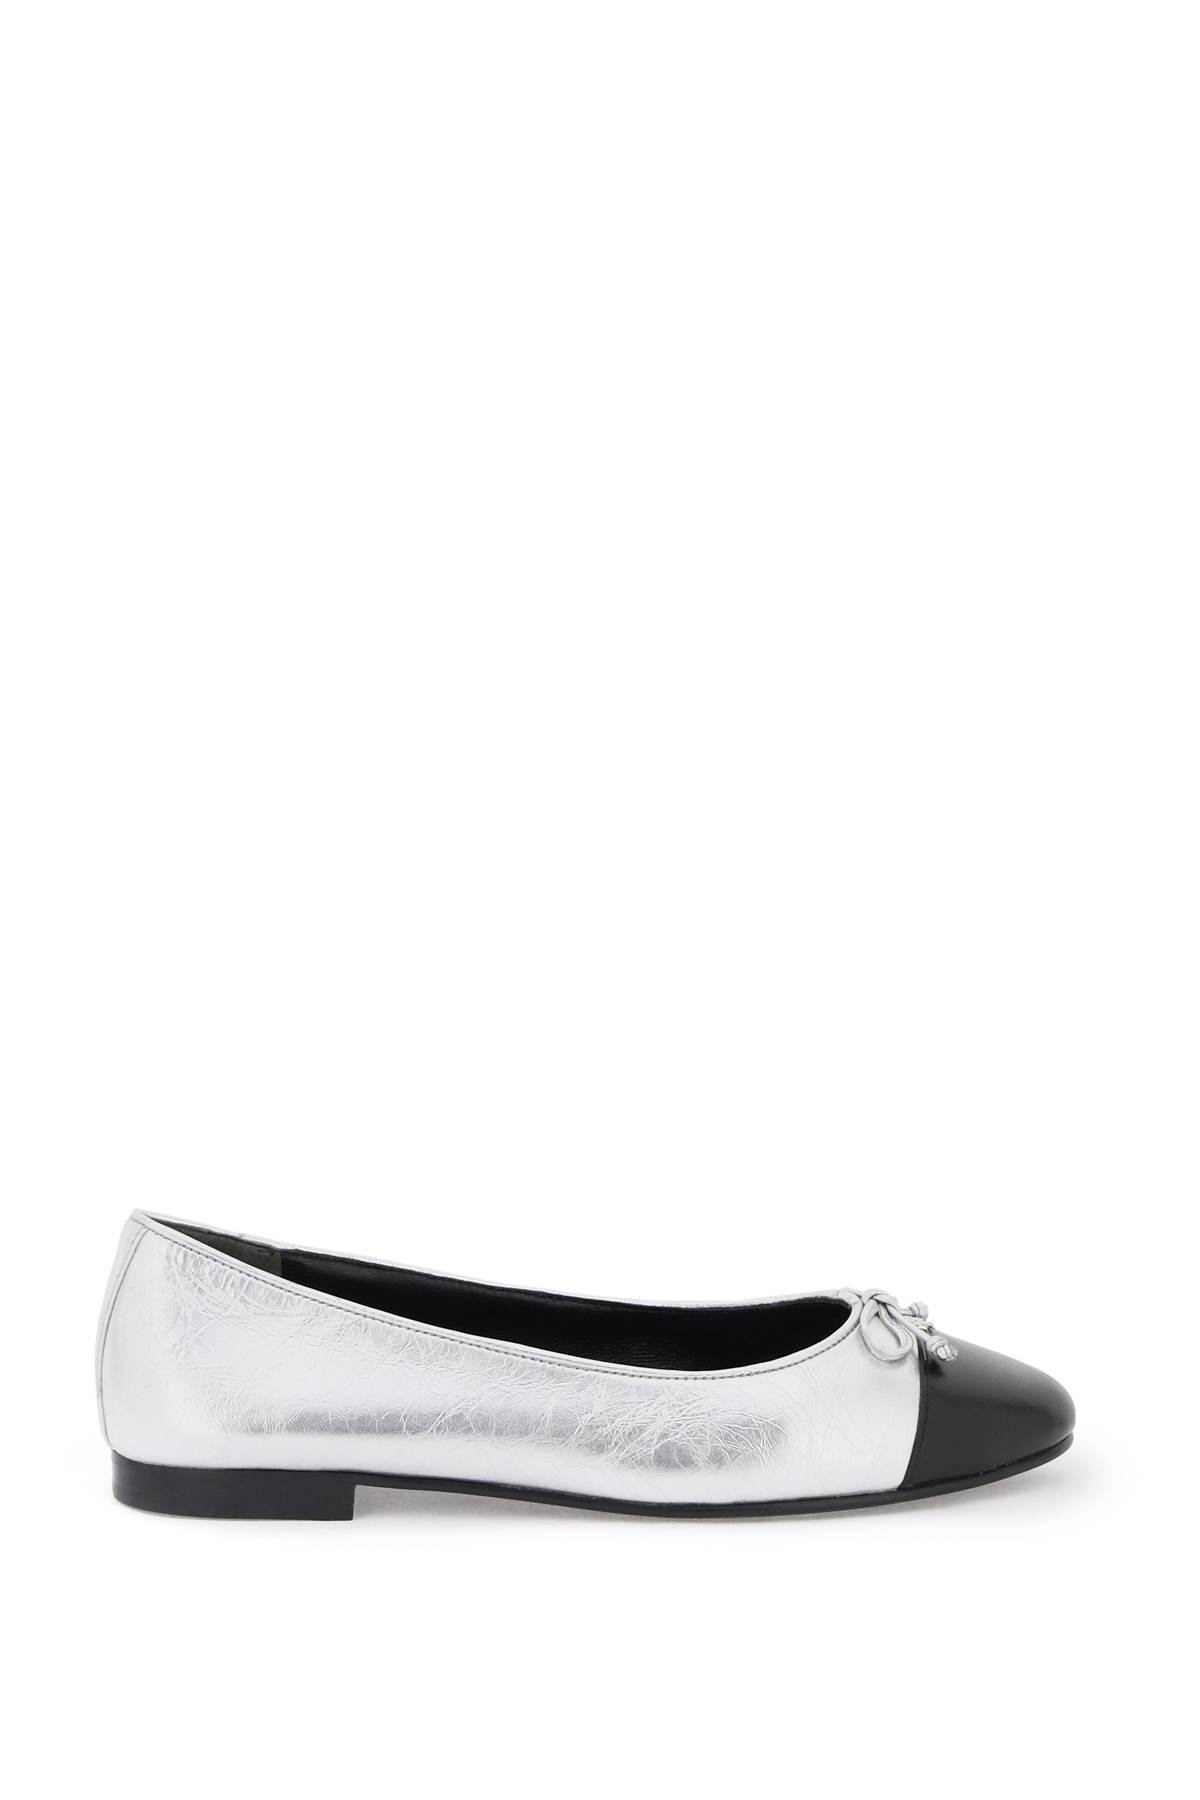 Shop Tory Burch Laminated Ballet Flats With Contrasting Toe Flat Shoes In Silver